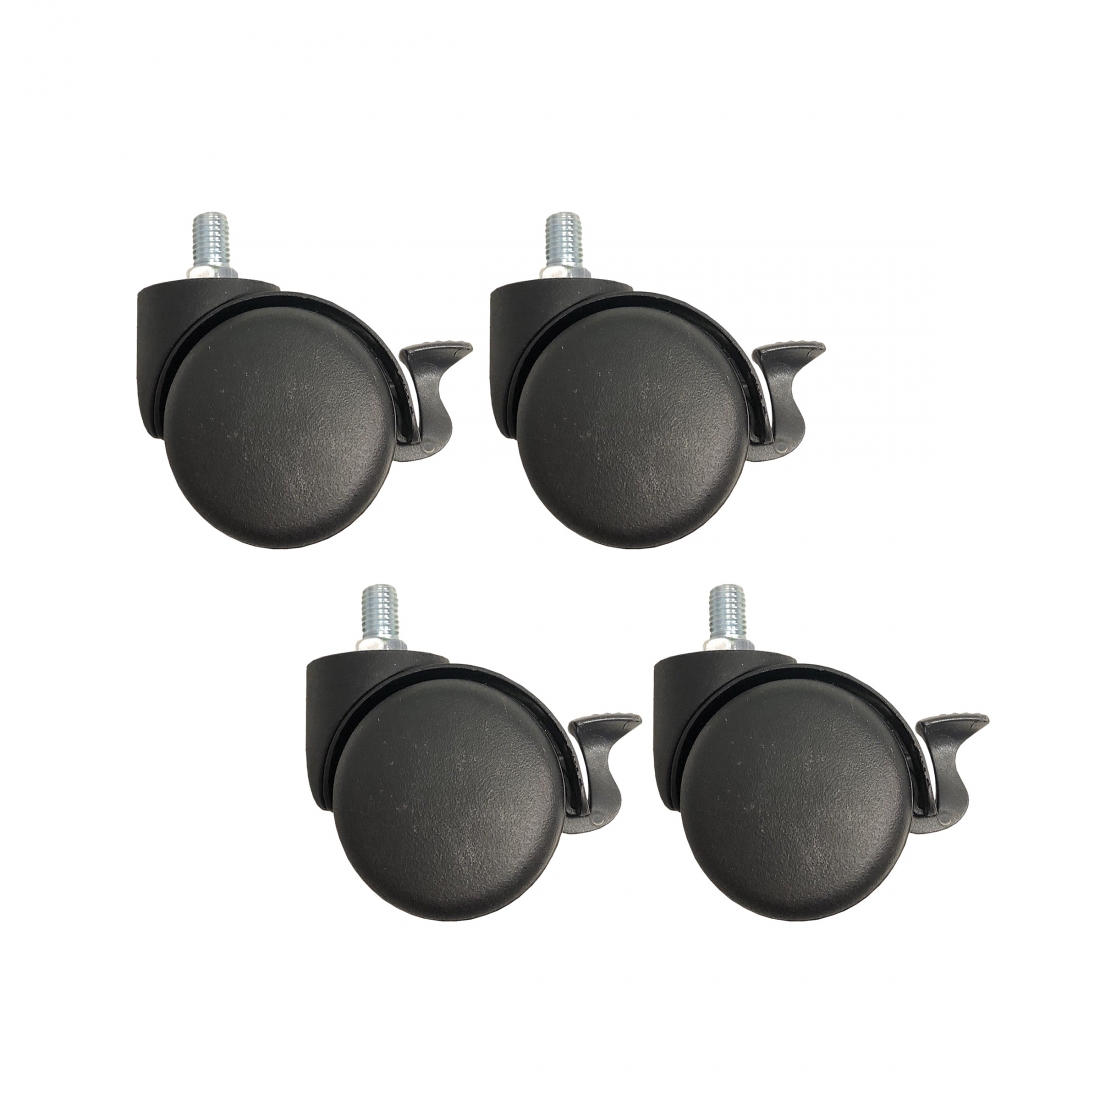 4 Pack of Locking Casters